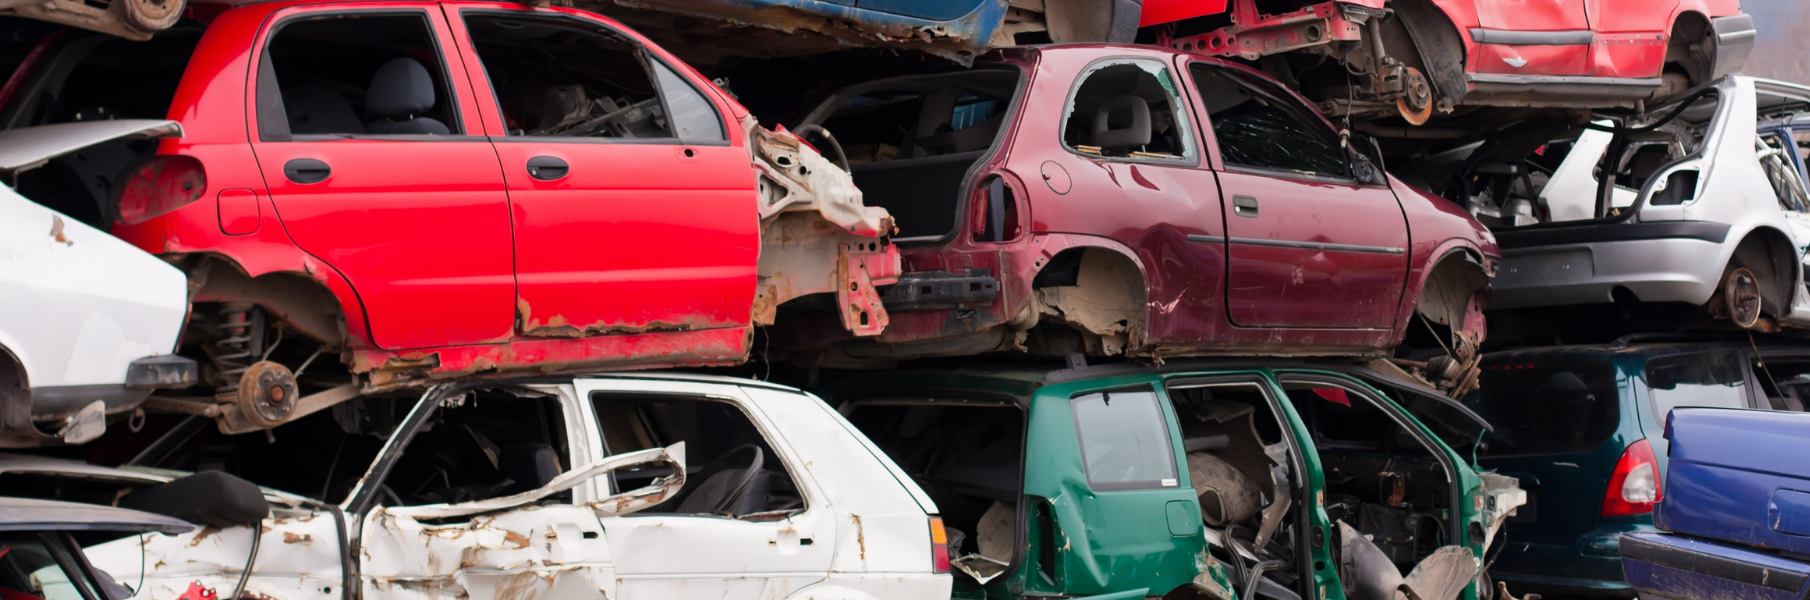 Multiple colored junk cars shown stacked together in a junkyard.